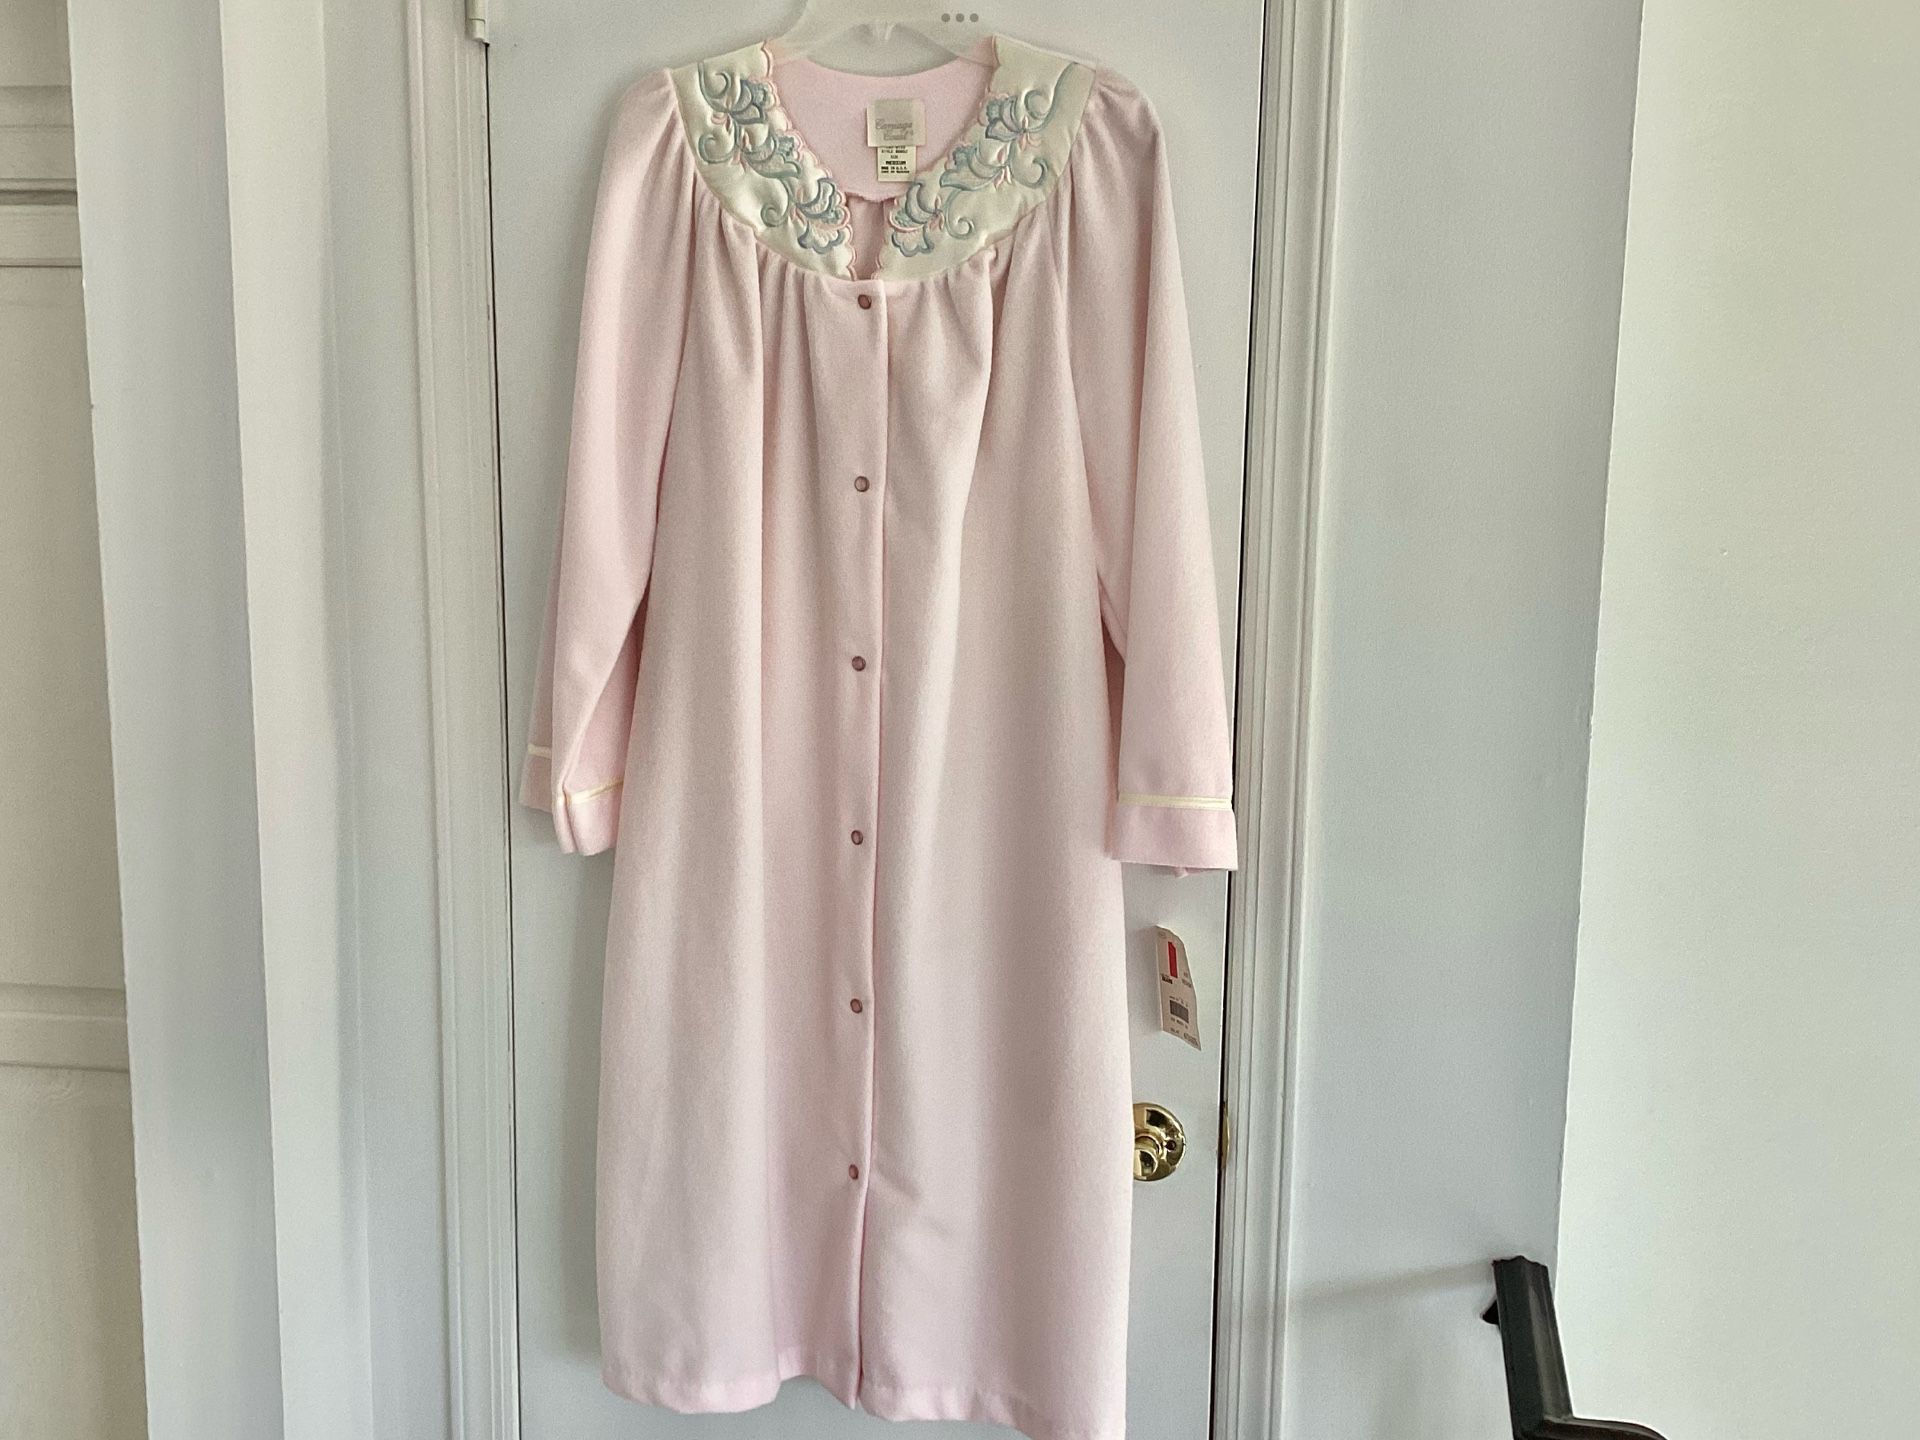 Vintage 1980’s Carriage Court Embroidered Pattern Pink Housecoat / Robe Size Medium Women’s Front Snaps w/ Tags NEW Condition 